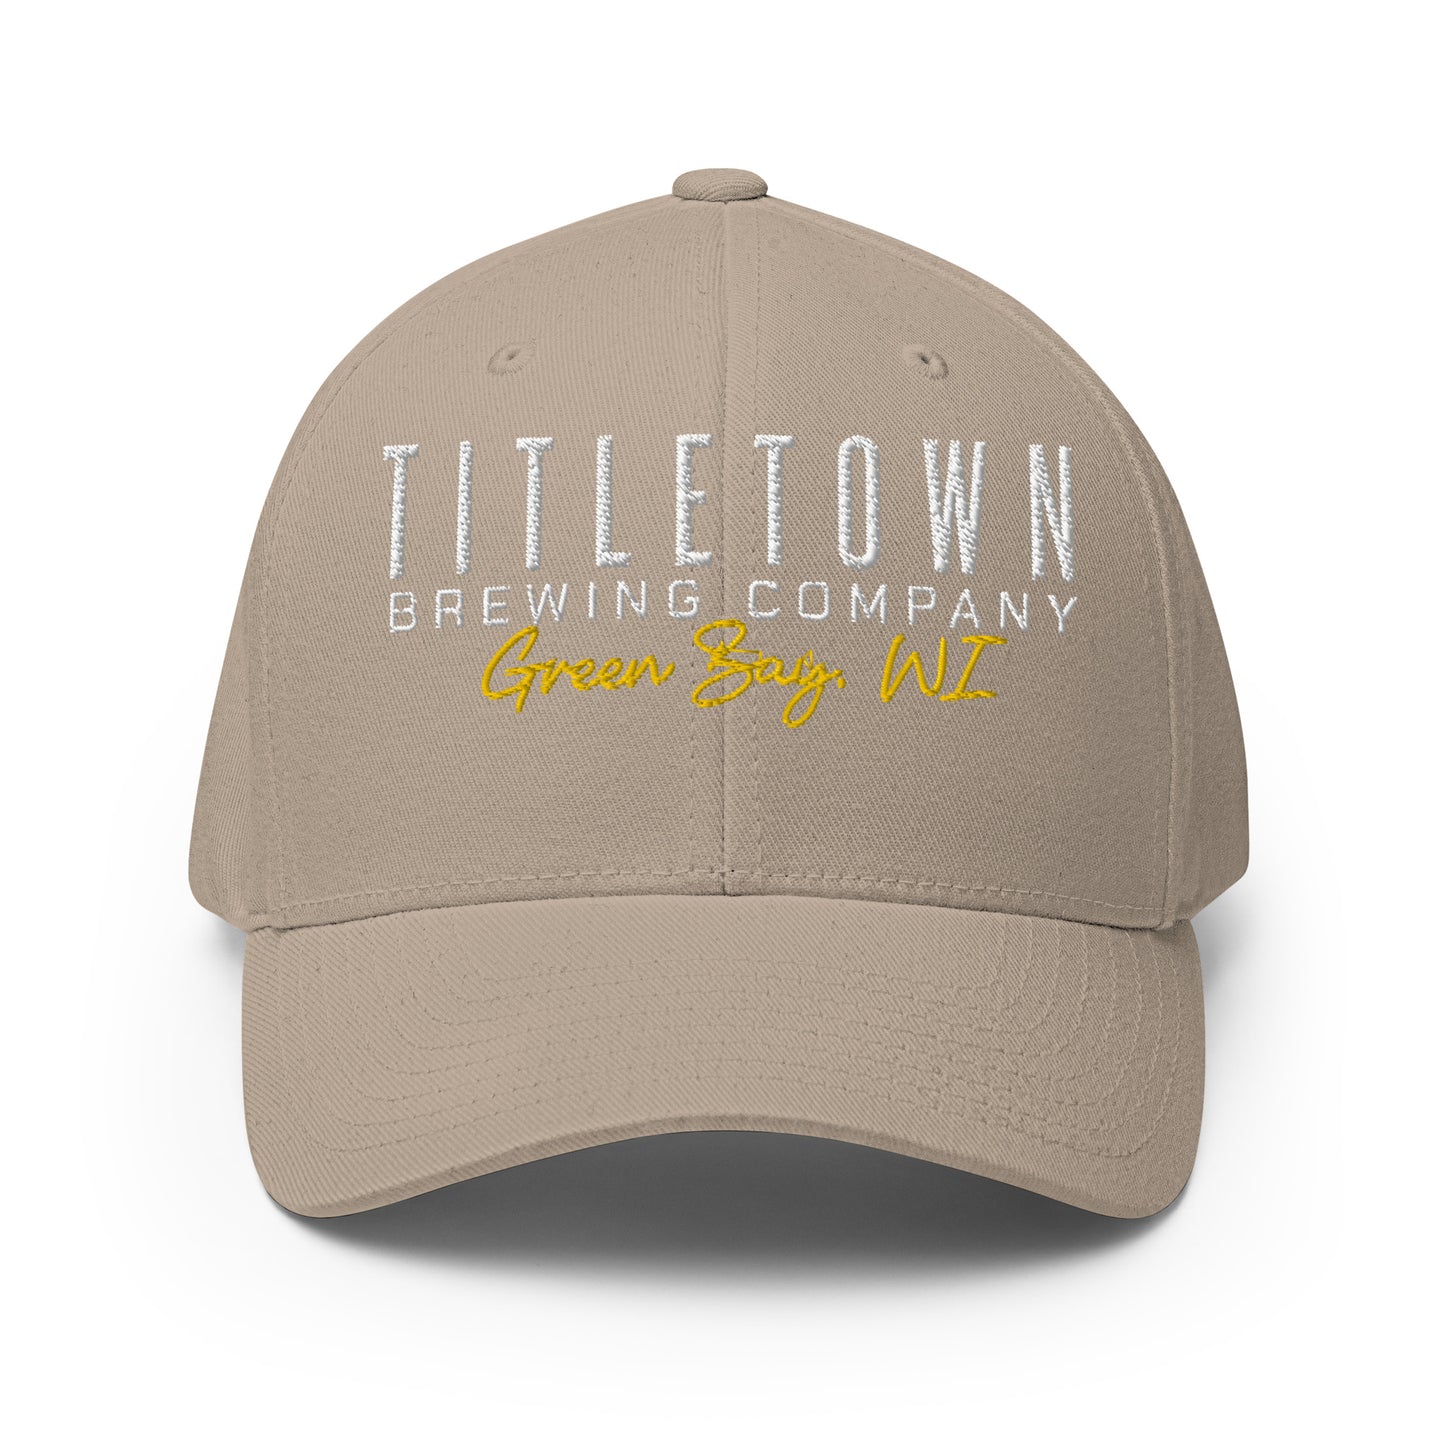 Titletown Brewing Co. Fitted Twill Cap